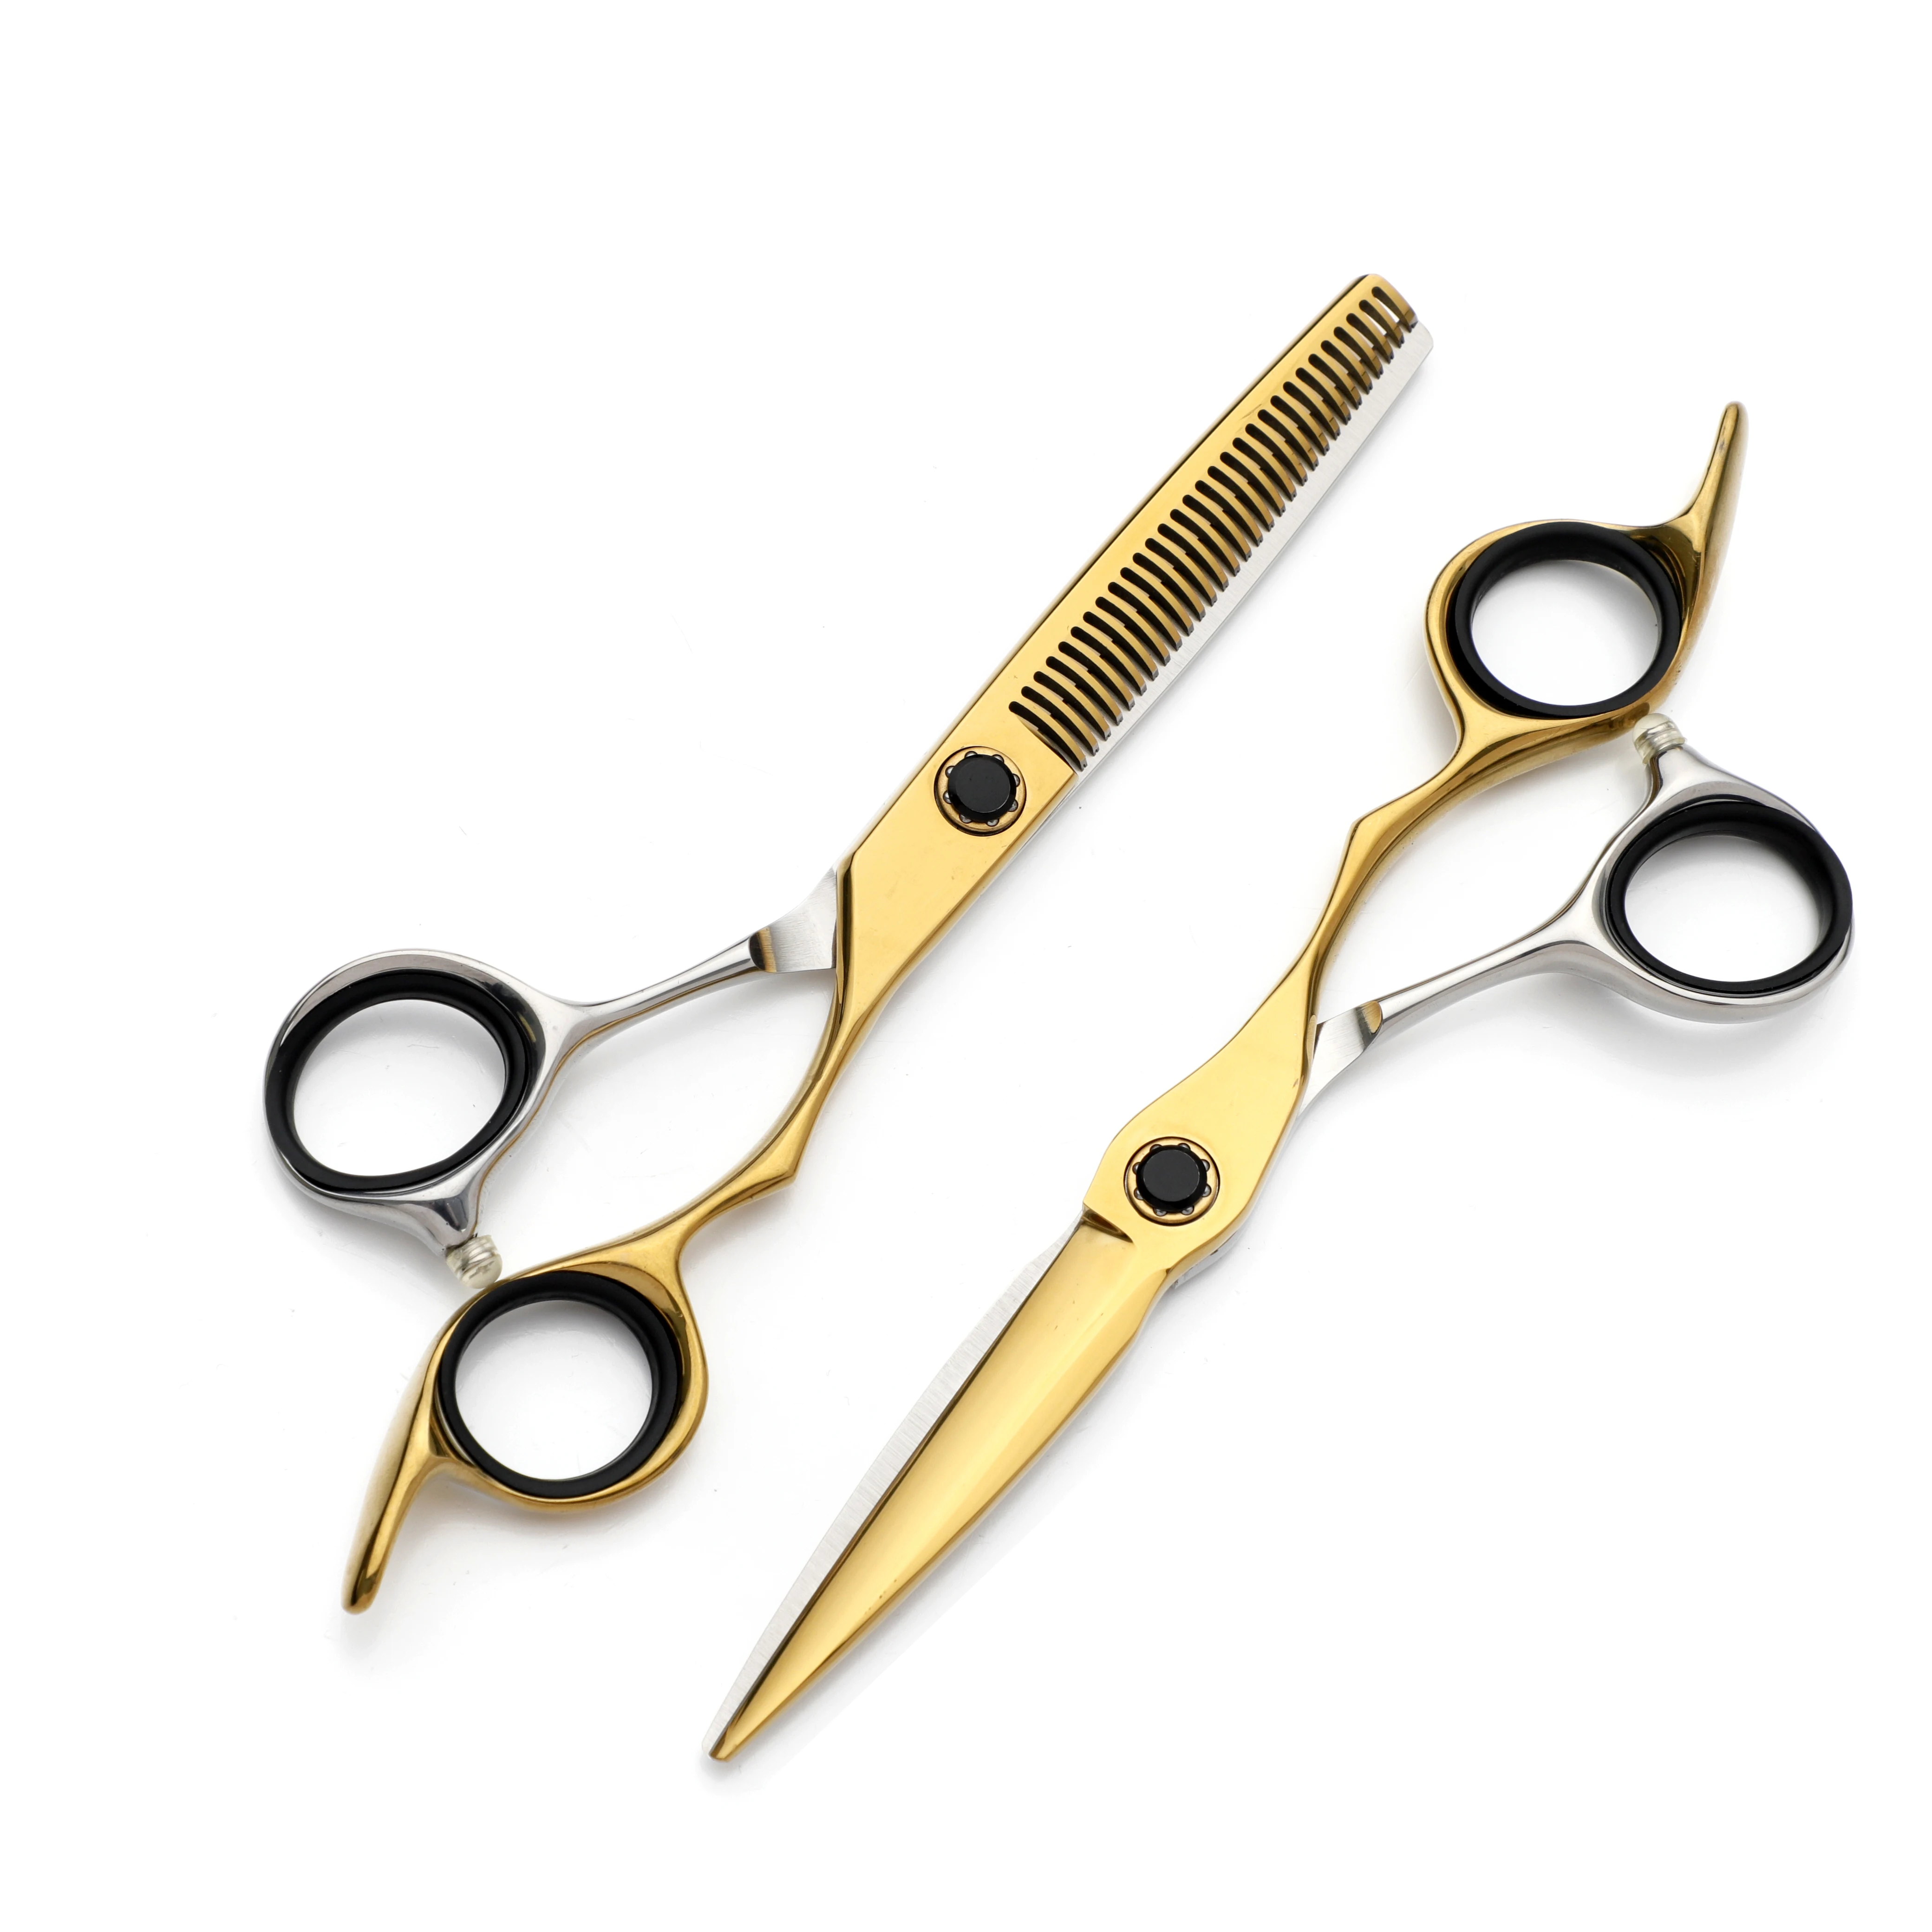 Professional Barber Scissors 440C Japanese Thinning Shears Hair Cutting Hairdressing Tools